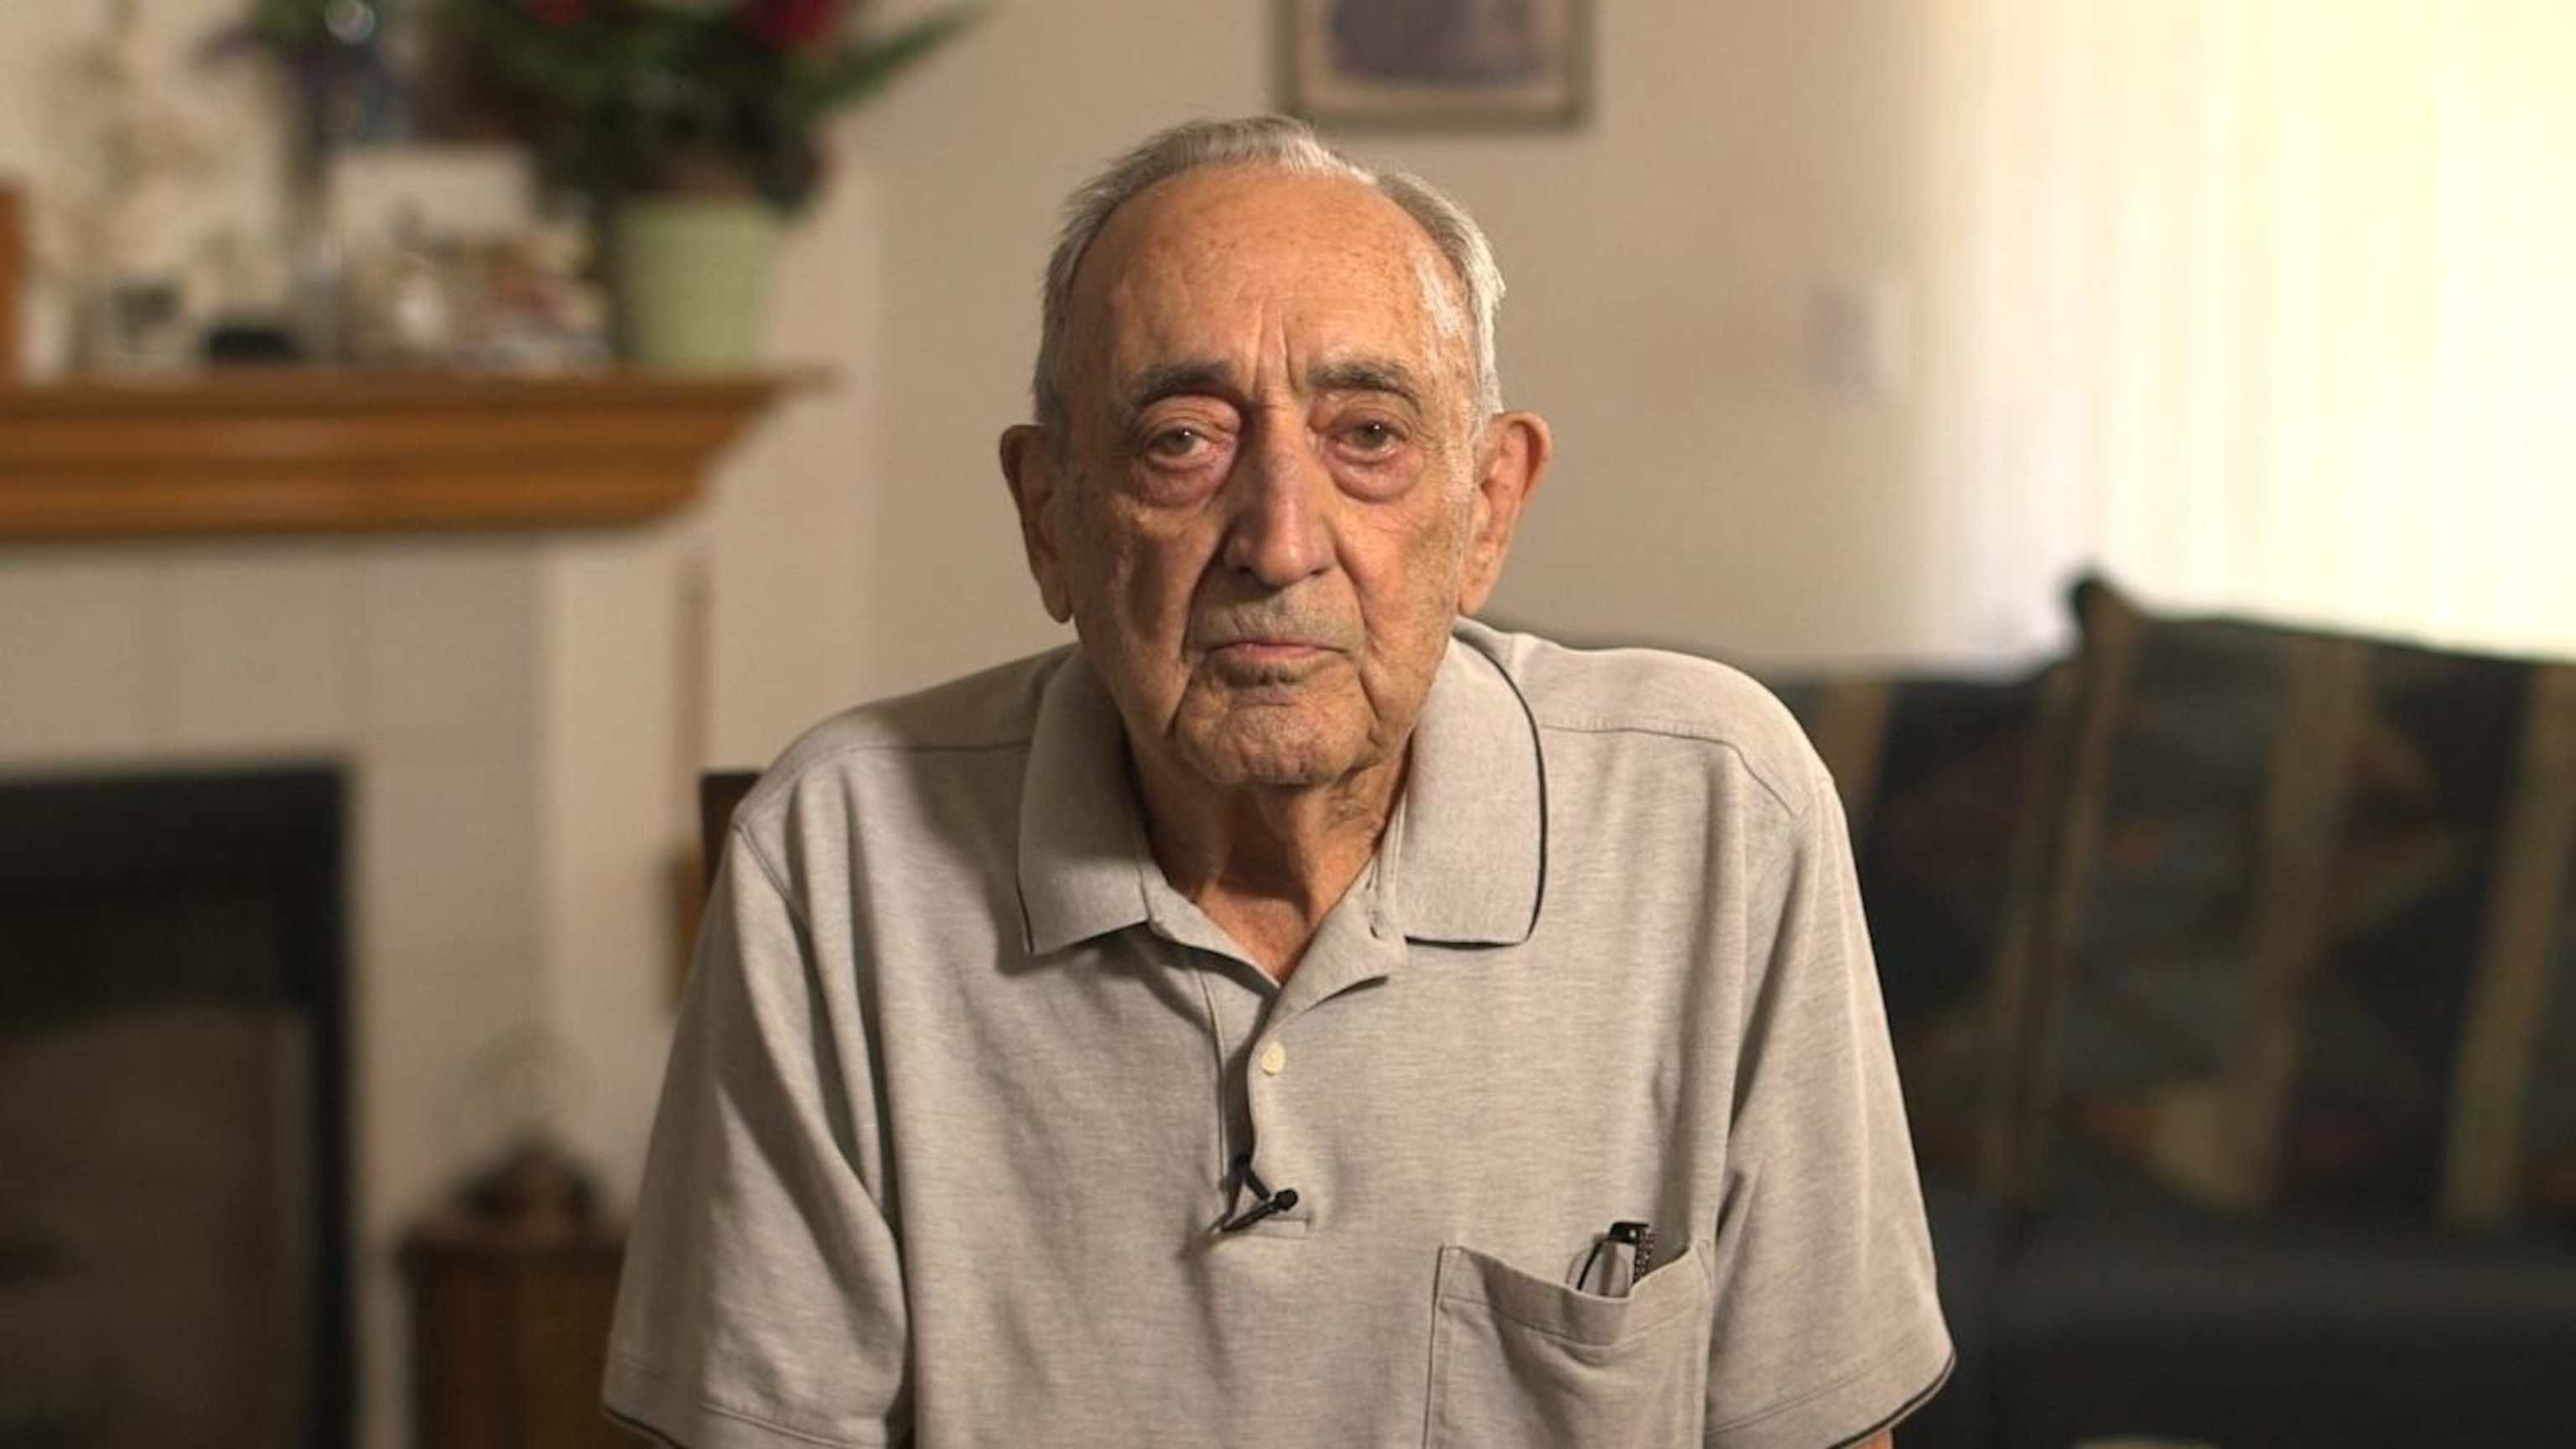 PHOTO: World War II veteran Onofrio Zicari looks back on the invasion of Normandy ahead of the 80th anniversary of D-Day.